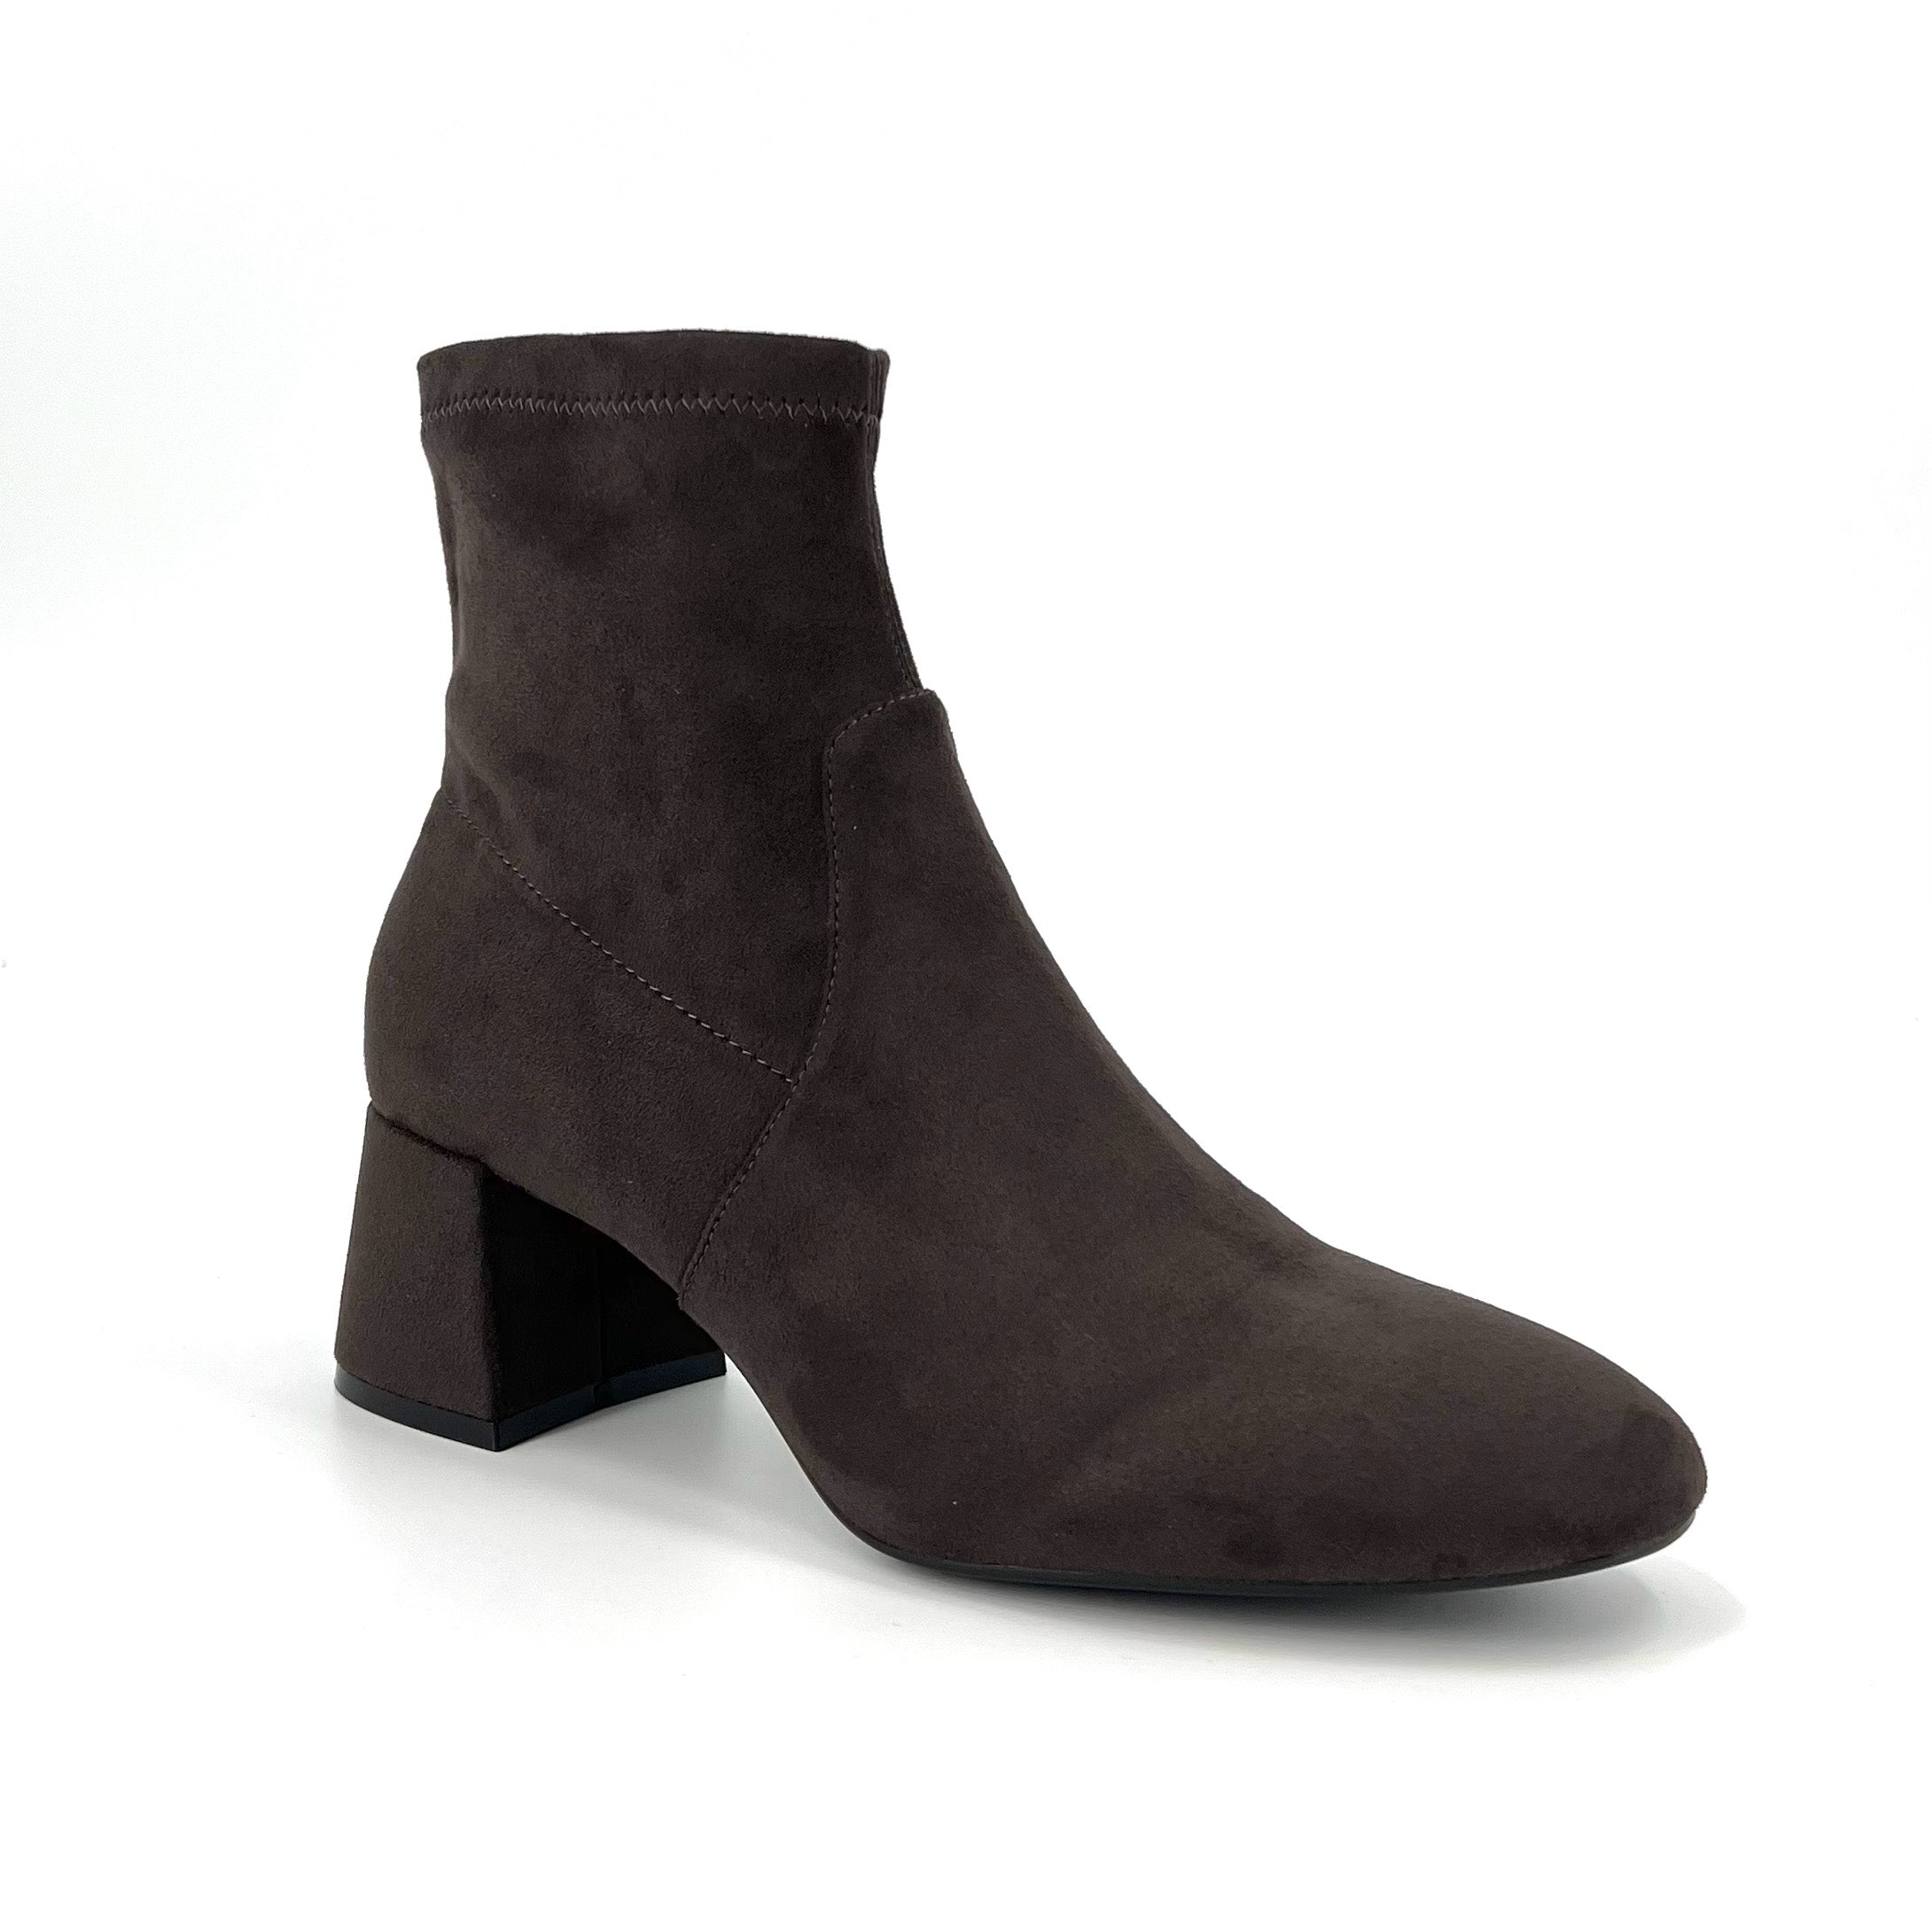 The Stretch Bootie with Inside Zip in Taupe